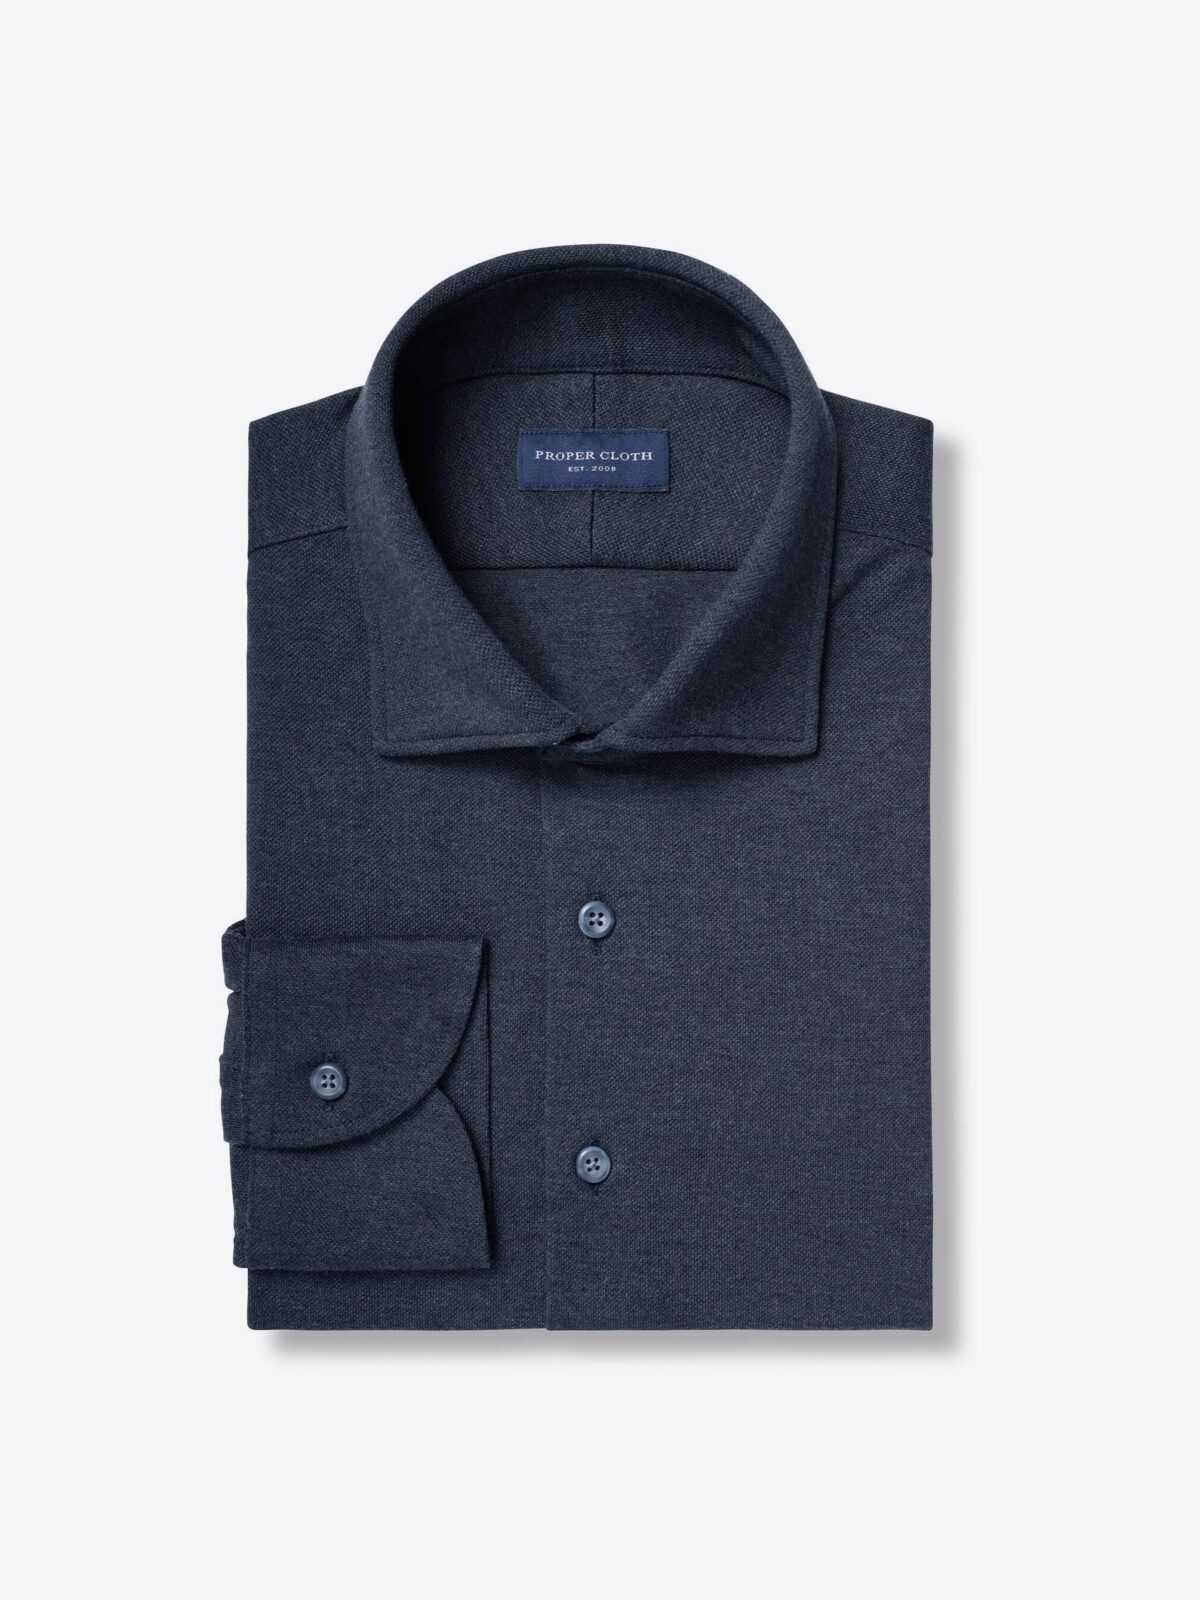 Canclini Navy Melange Easy Care Knit Pique Shirt by Proper Cloth